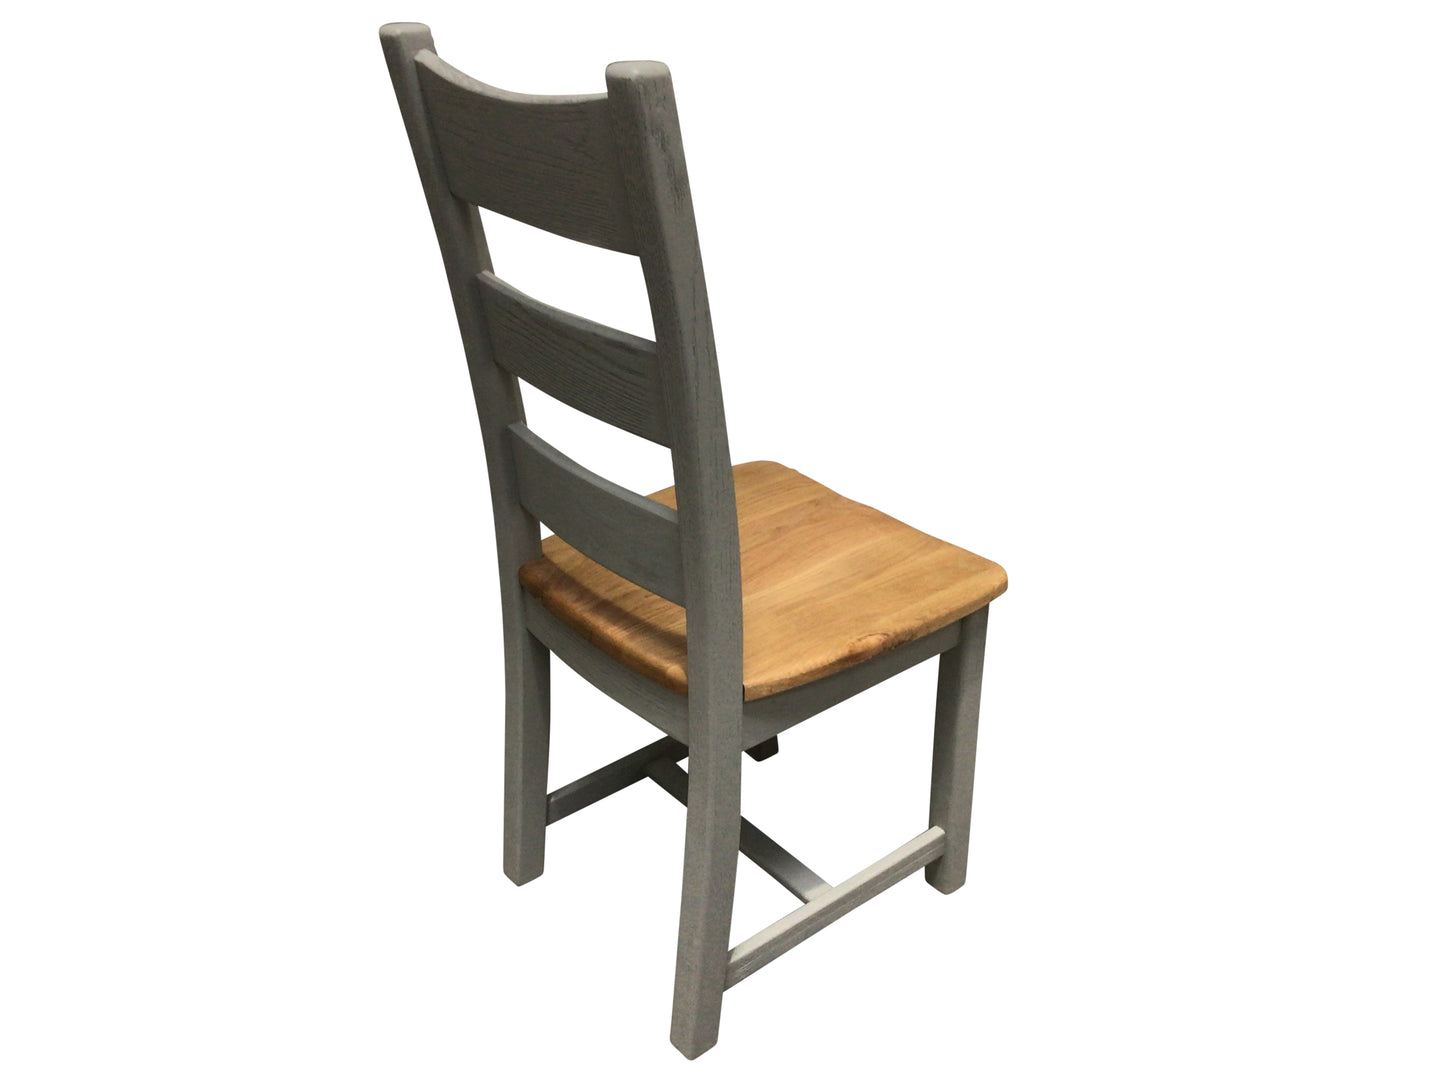 Danube Oak Dining Chair painted French Grey